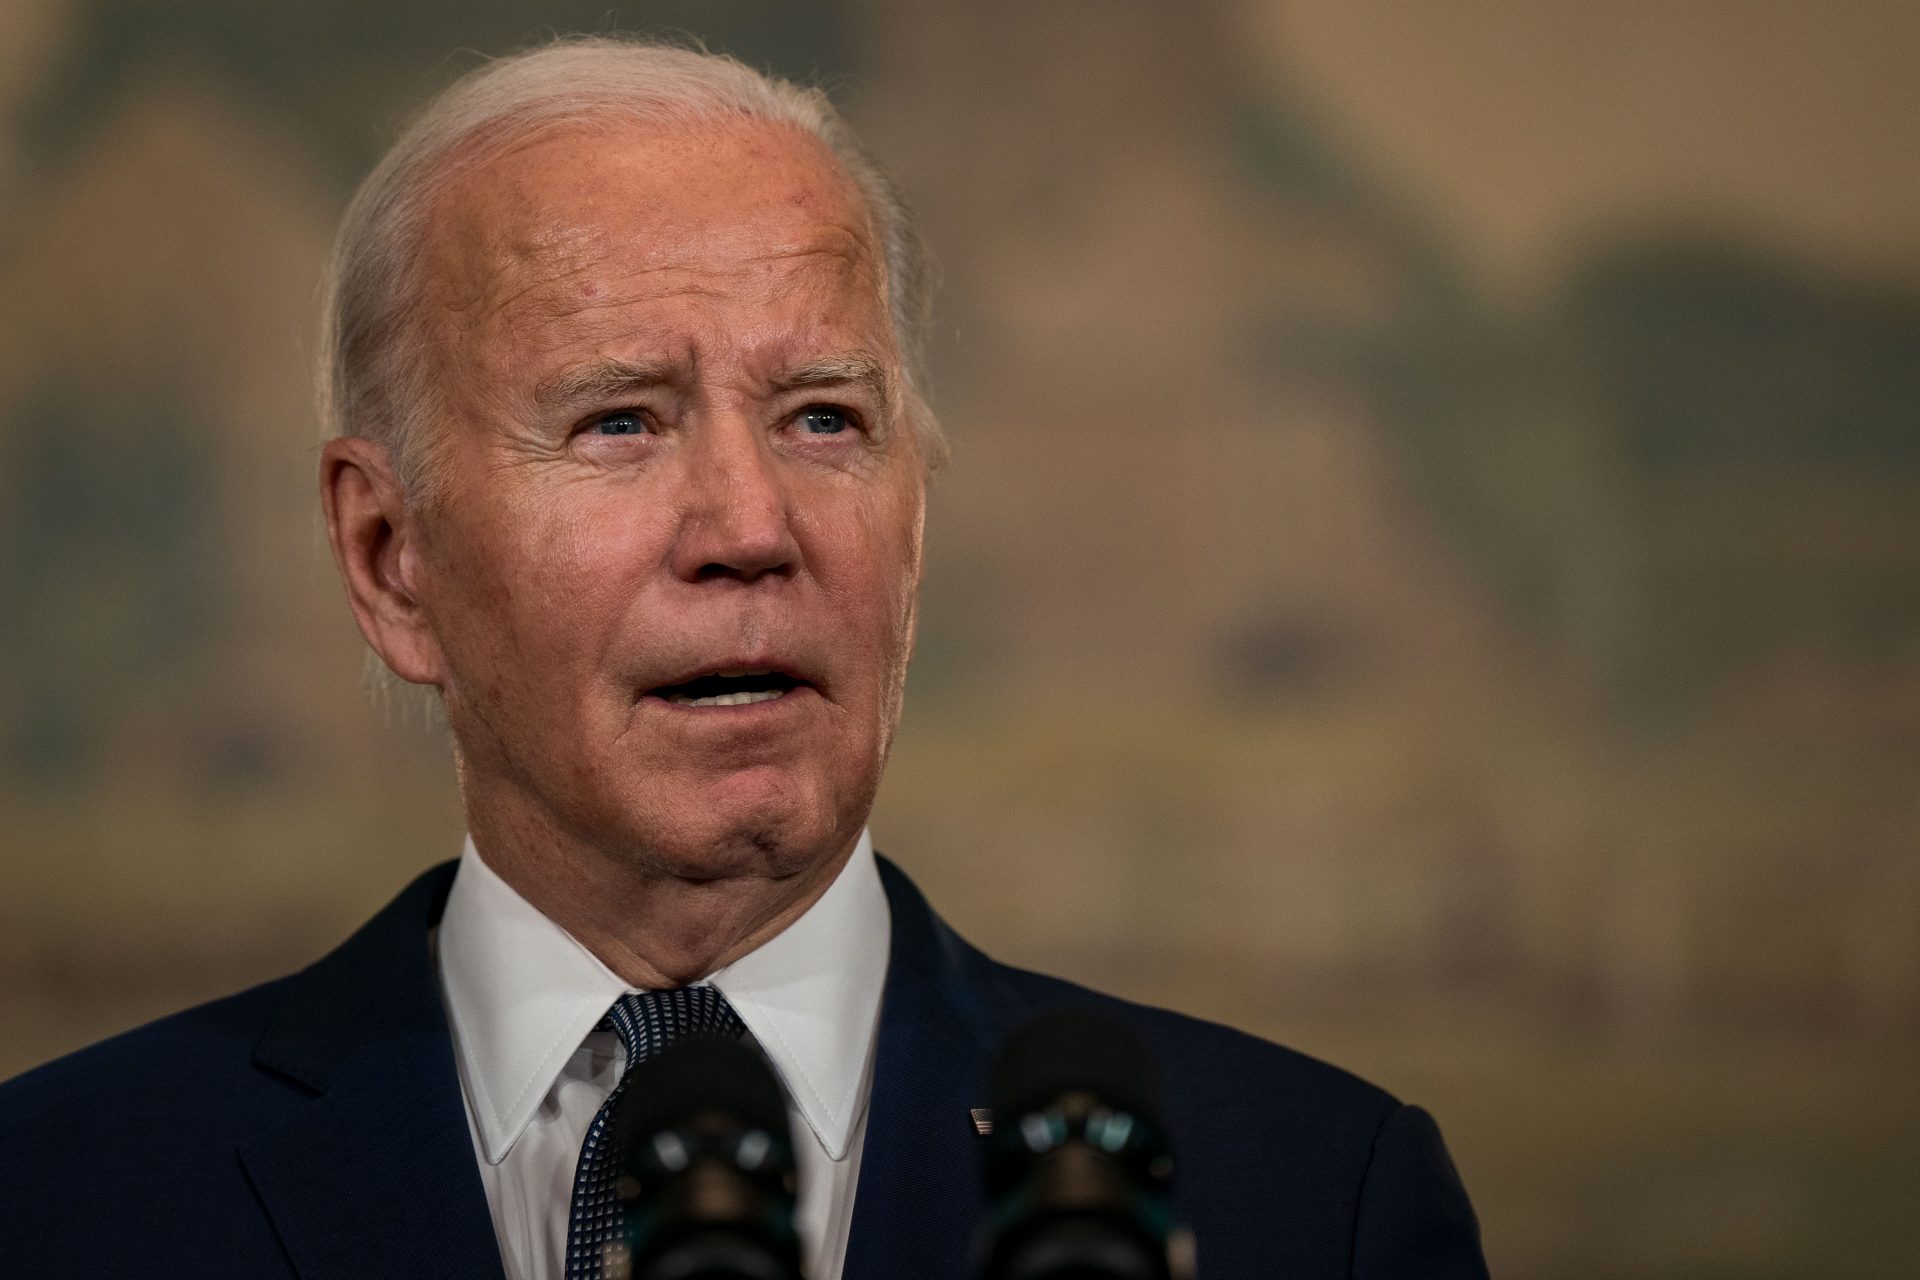 Did you miss Biden's worrying joke at a recent campaign event?